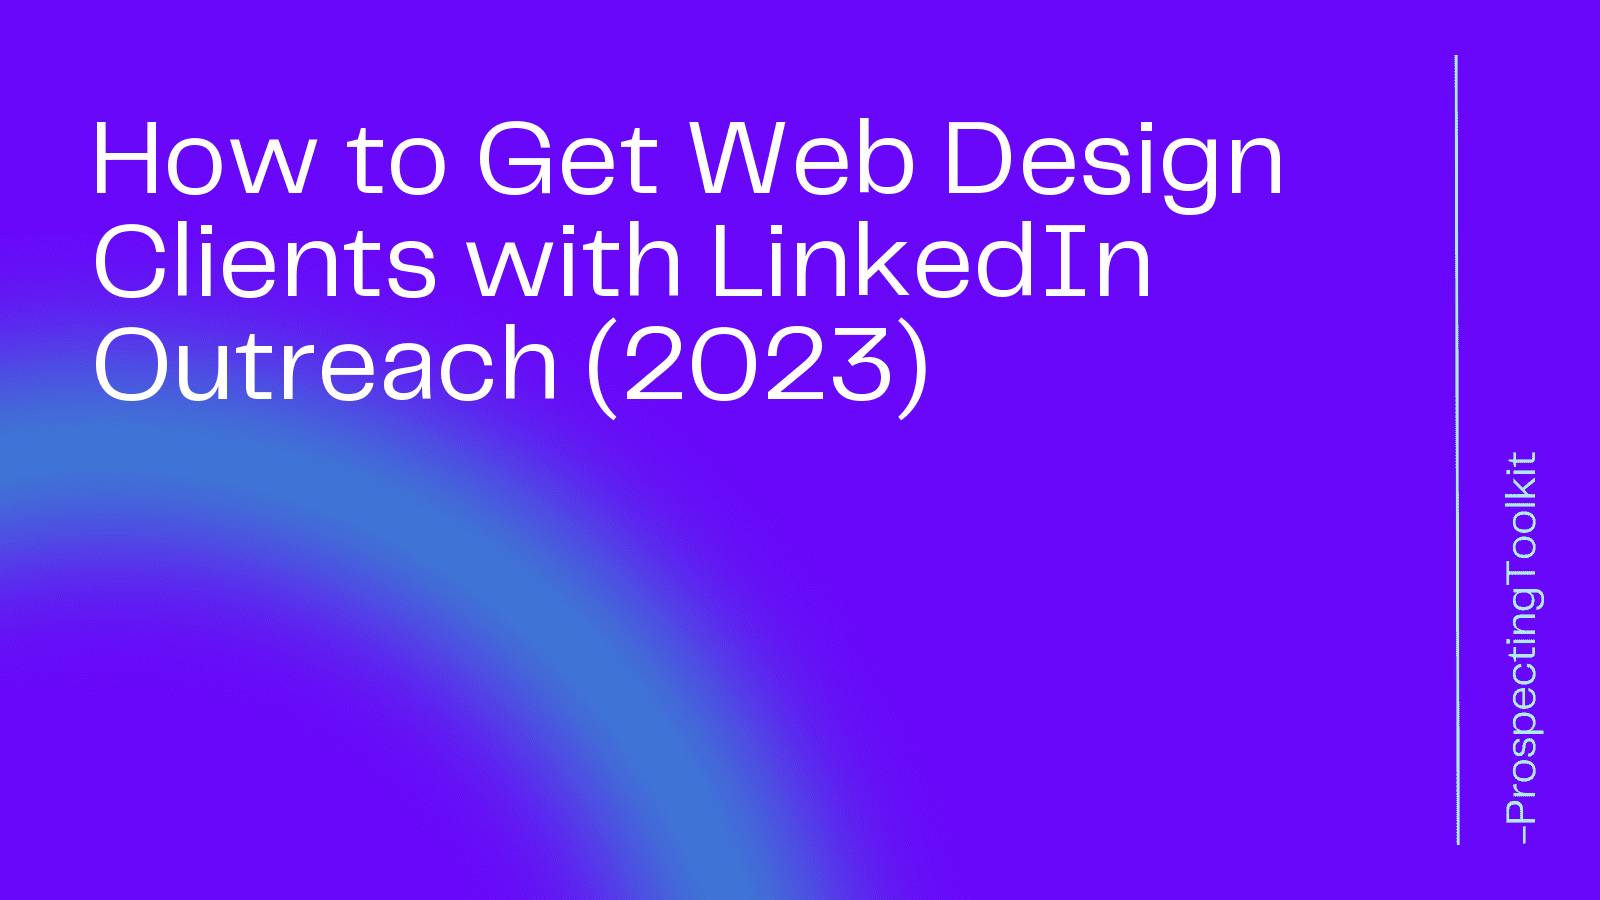 How to Get Web Design Clients with LinkedIn Outreach (2023)